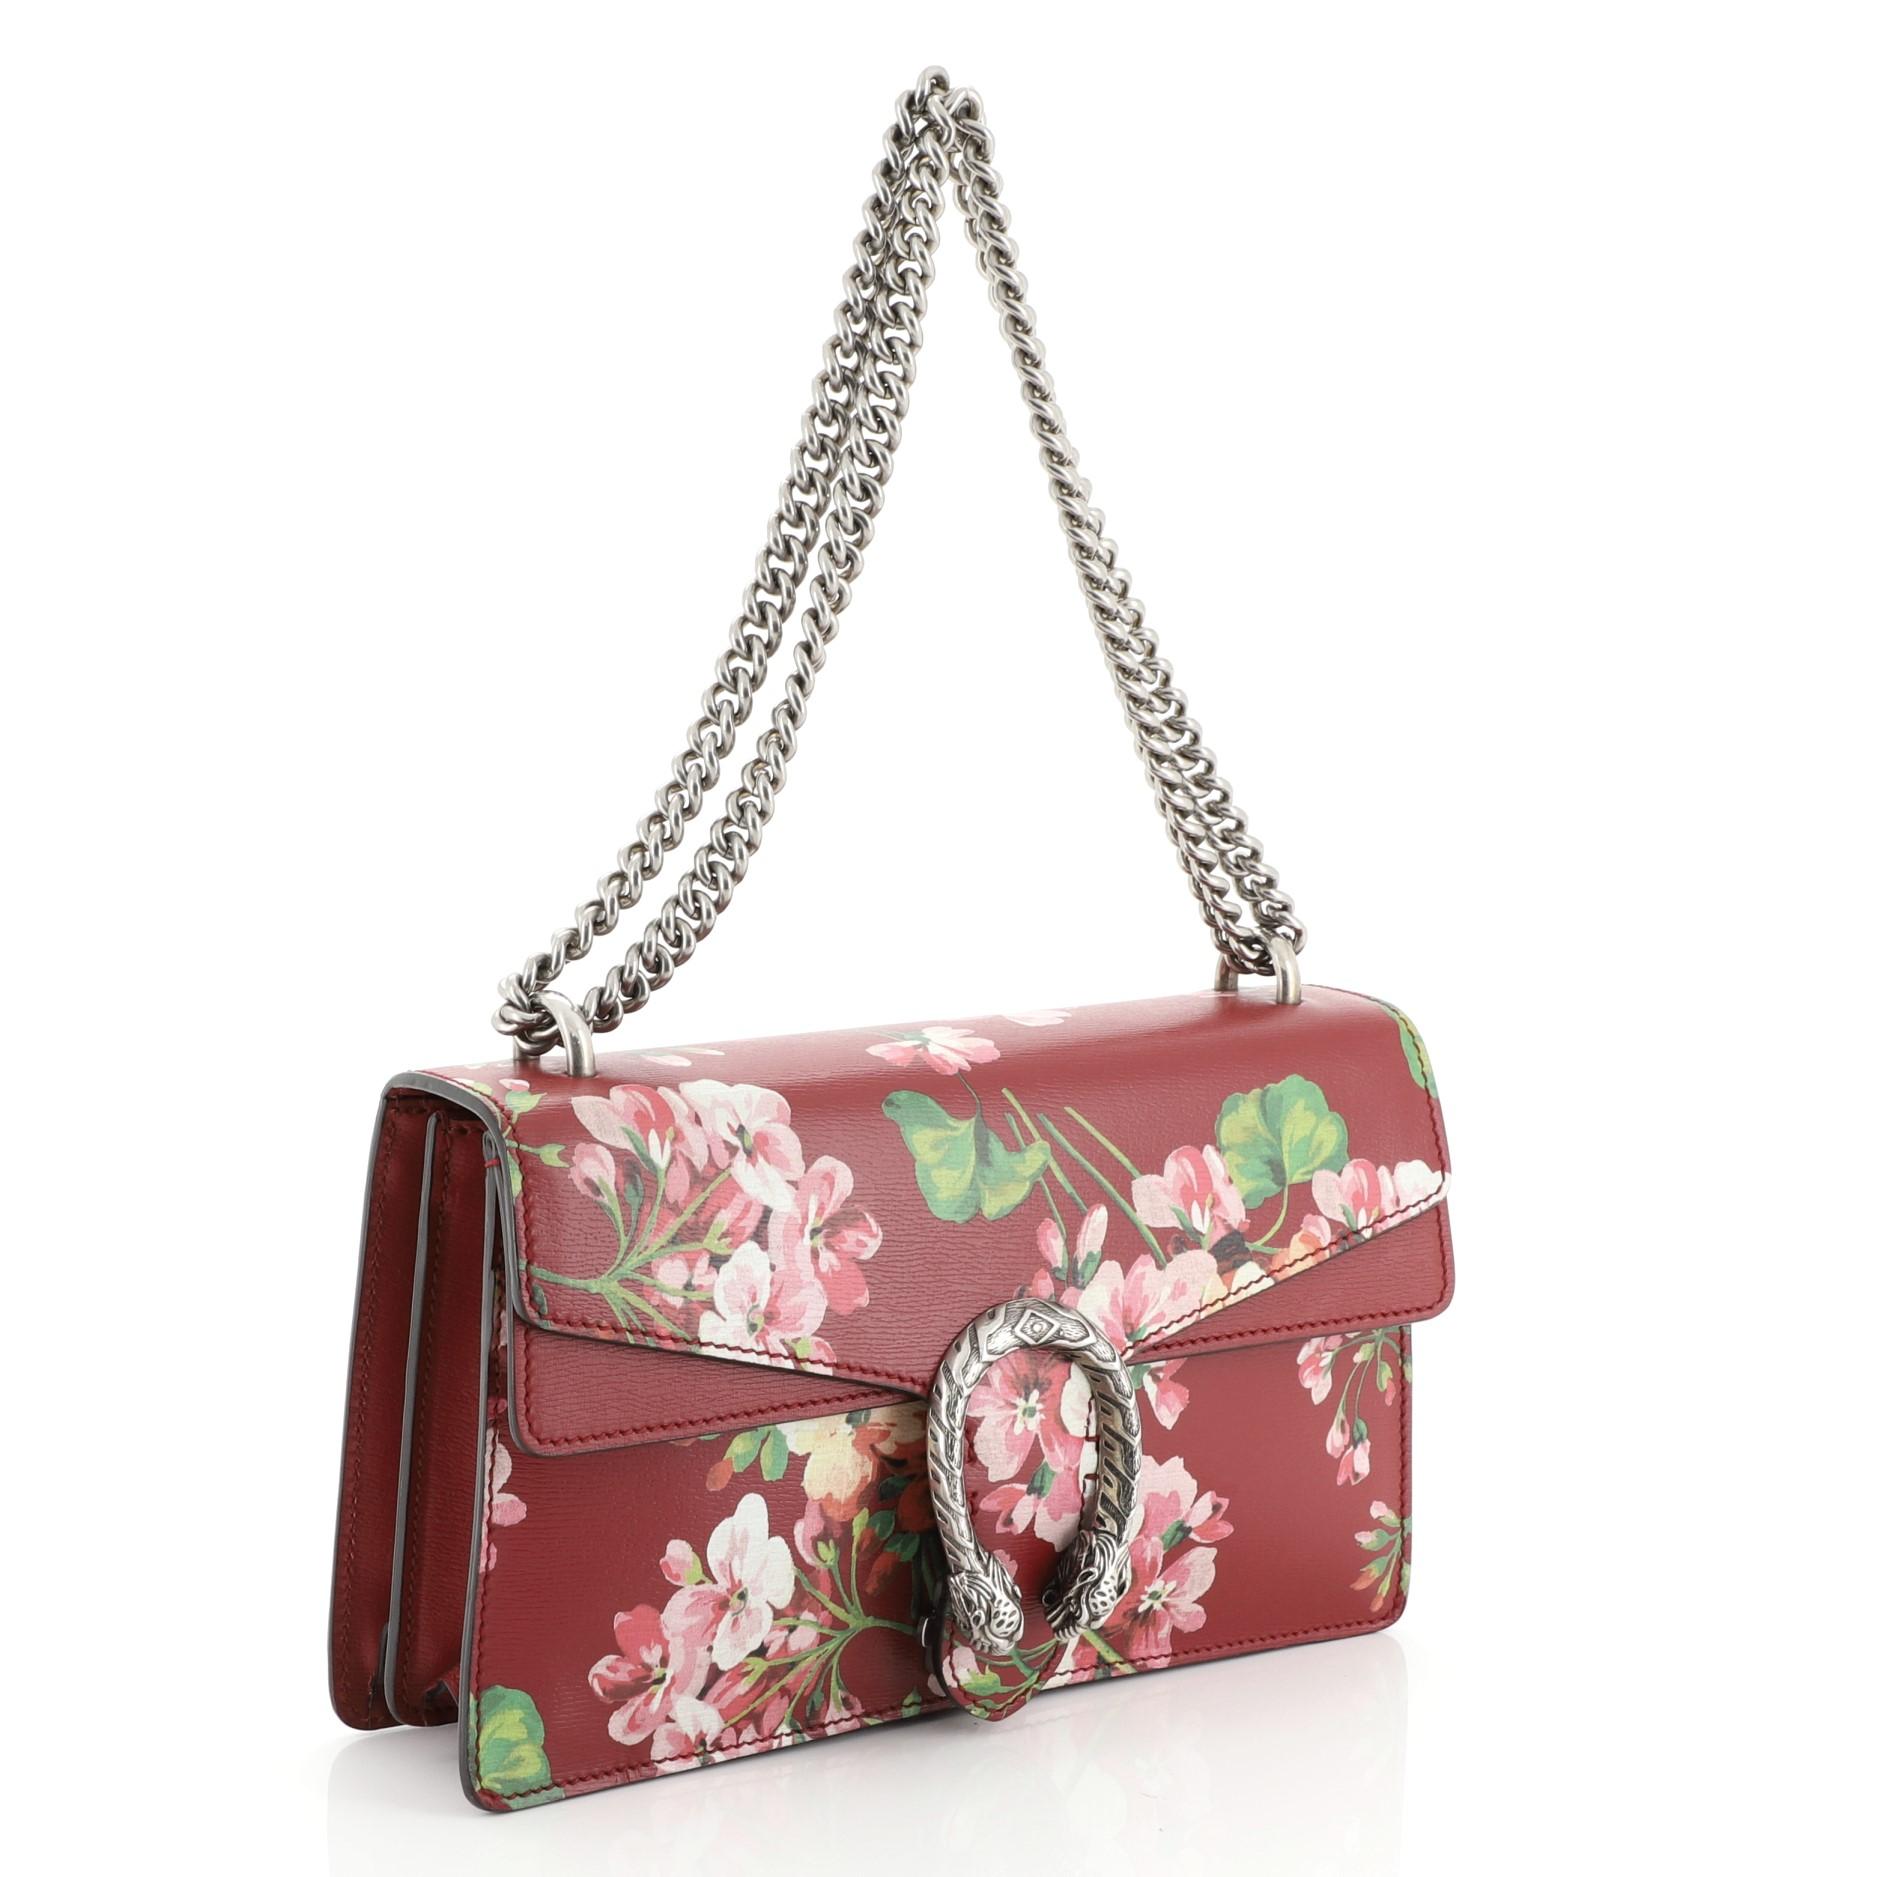 This Gucci Dionysus Bag Blooms Print Leather Small, crafted from red leather with floral print, features sliding chain strap, tiger head spur detail on flap, and aged silver-tone hardware. Its pin closure with side release opens to a neutral canvas